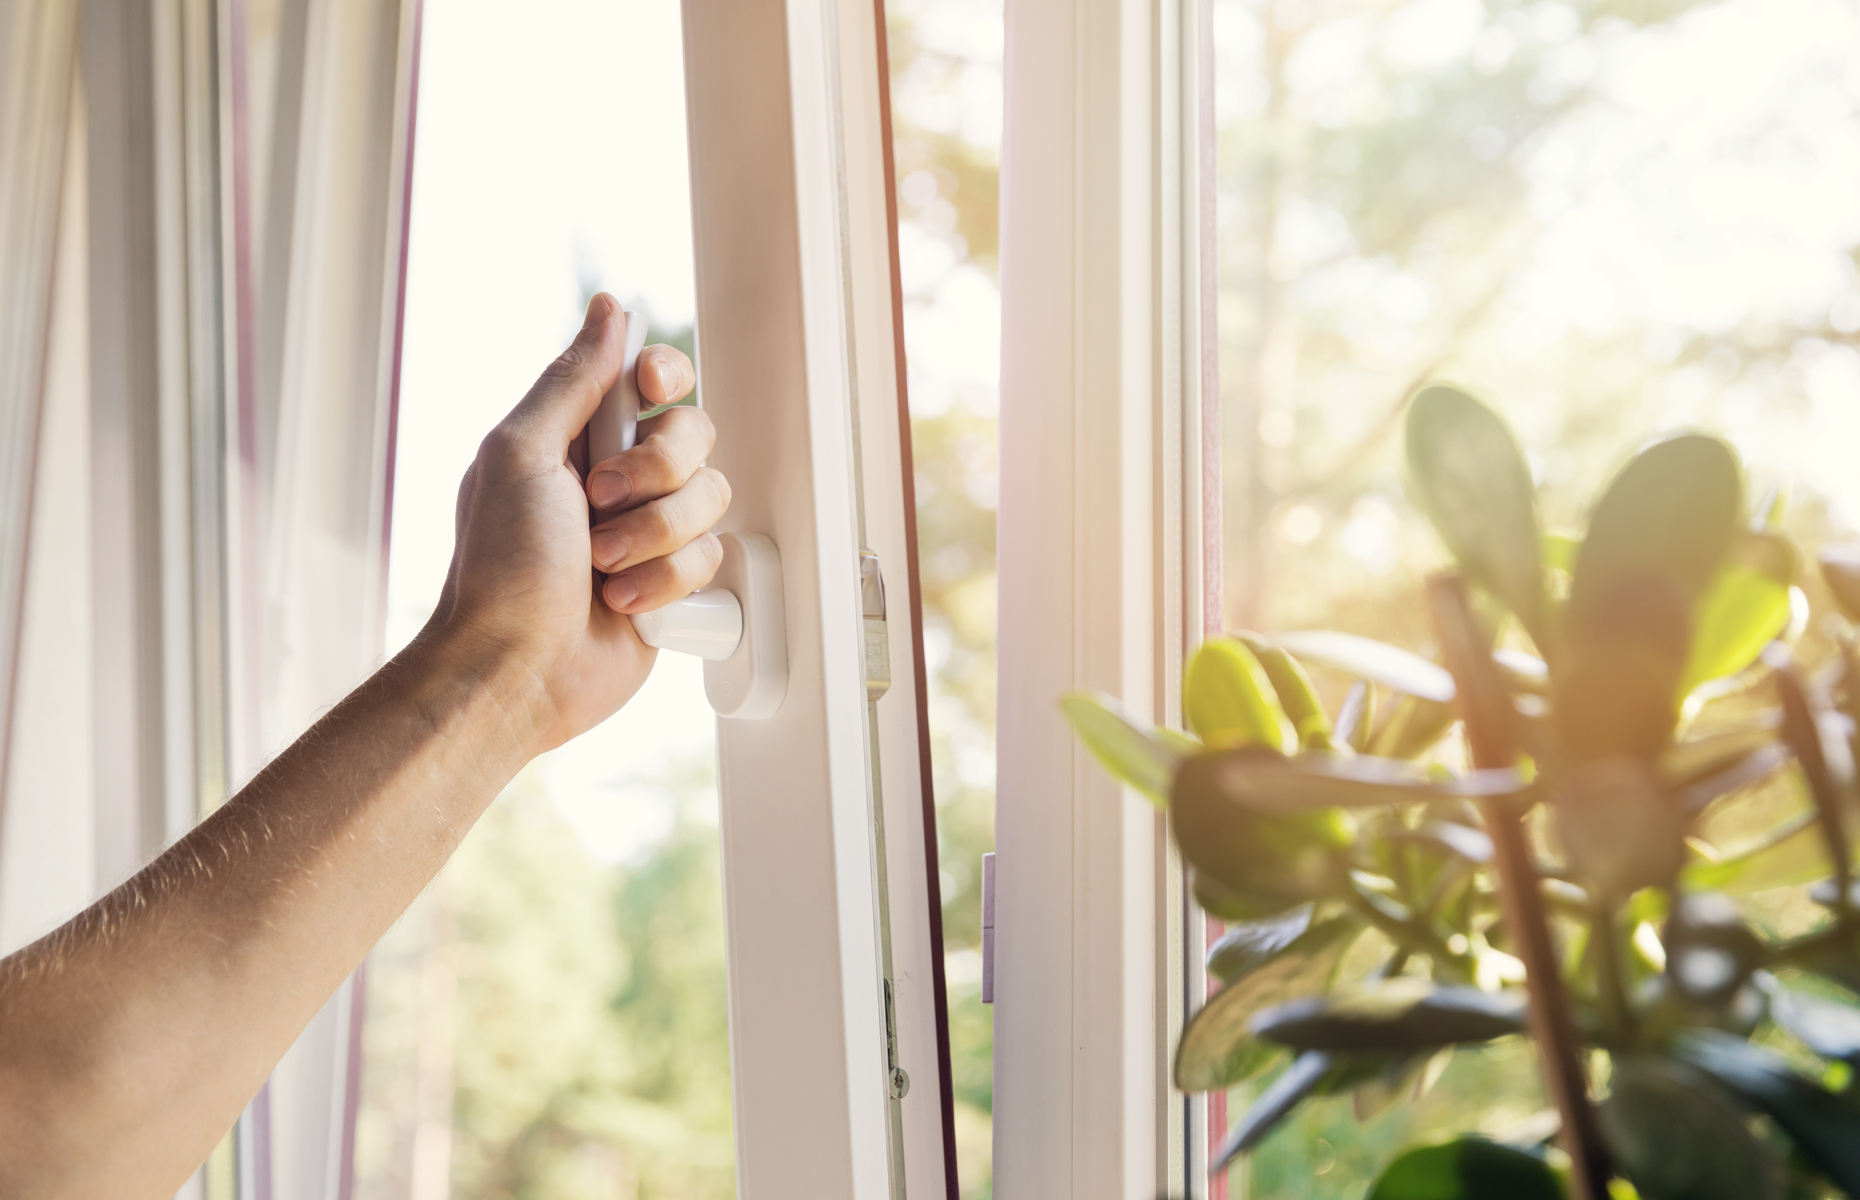 Natural ventilation is a great way to flush out germs. Image: ronstik / Shutterstock